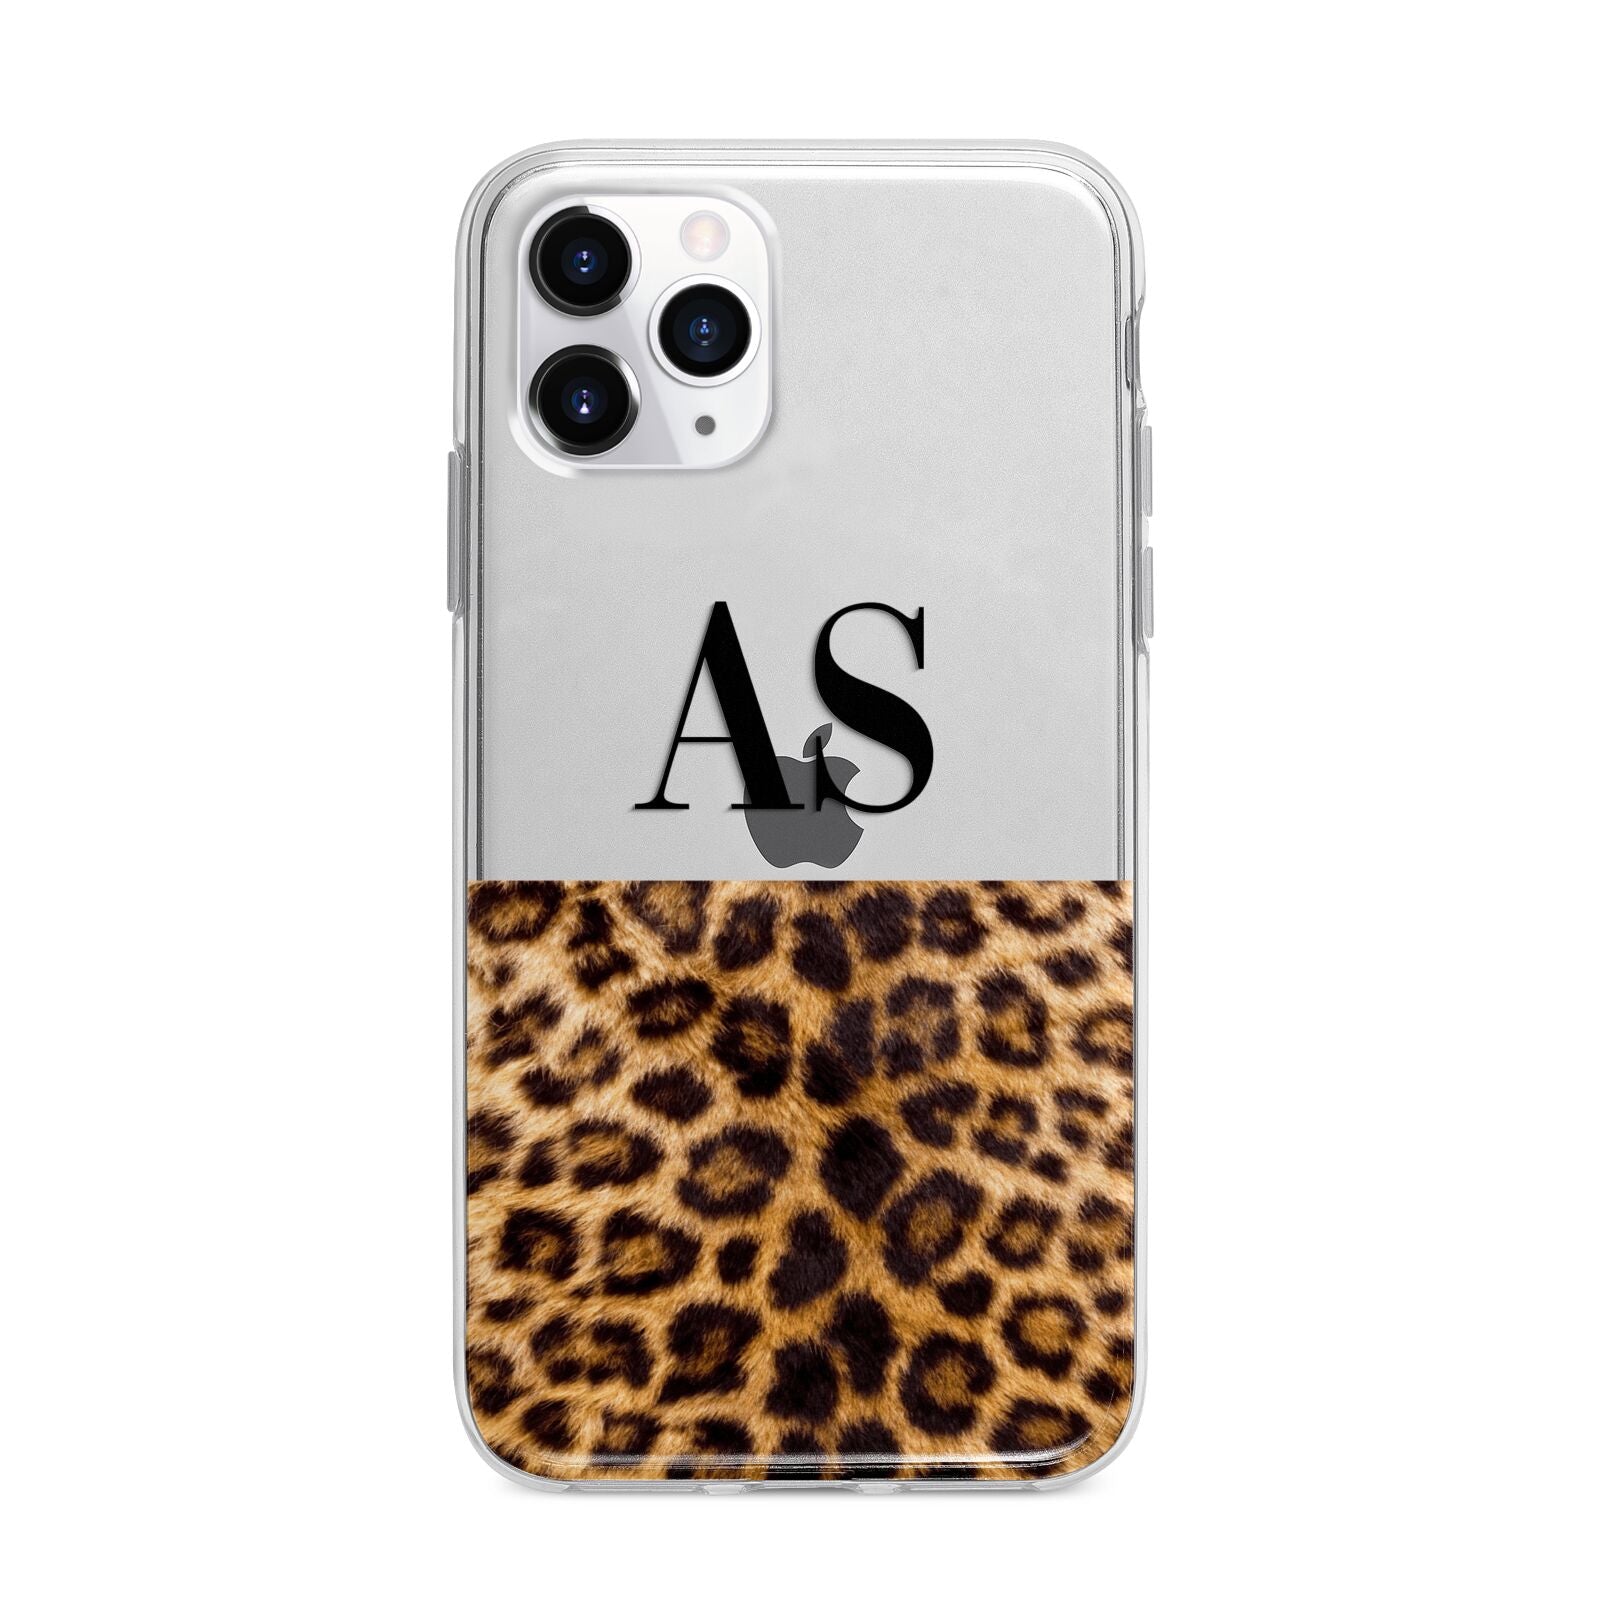 Initialled Leopard Print Apple iPhone 11 Pro Max in Silver with Bumper Case